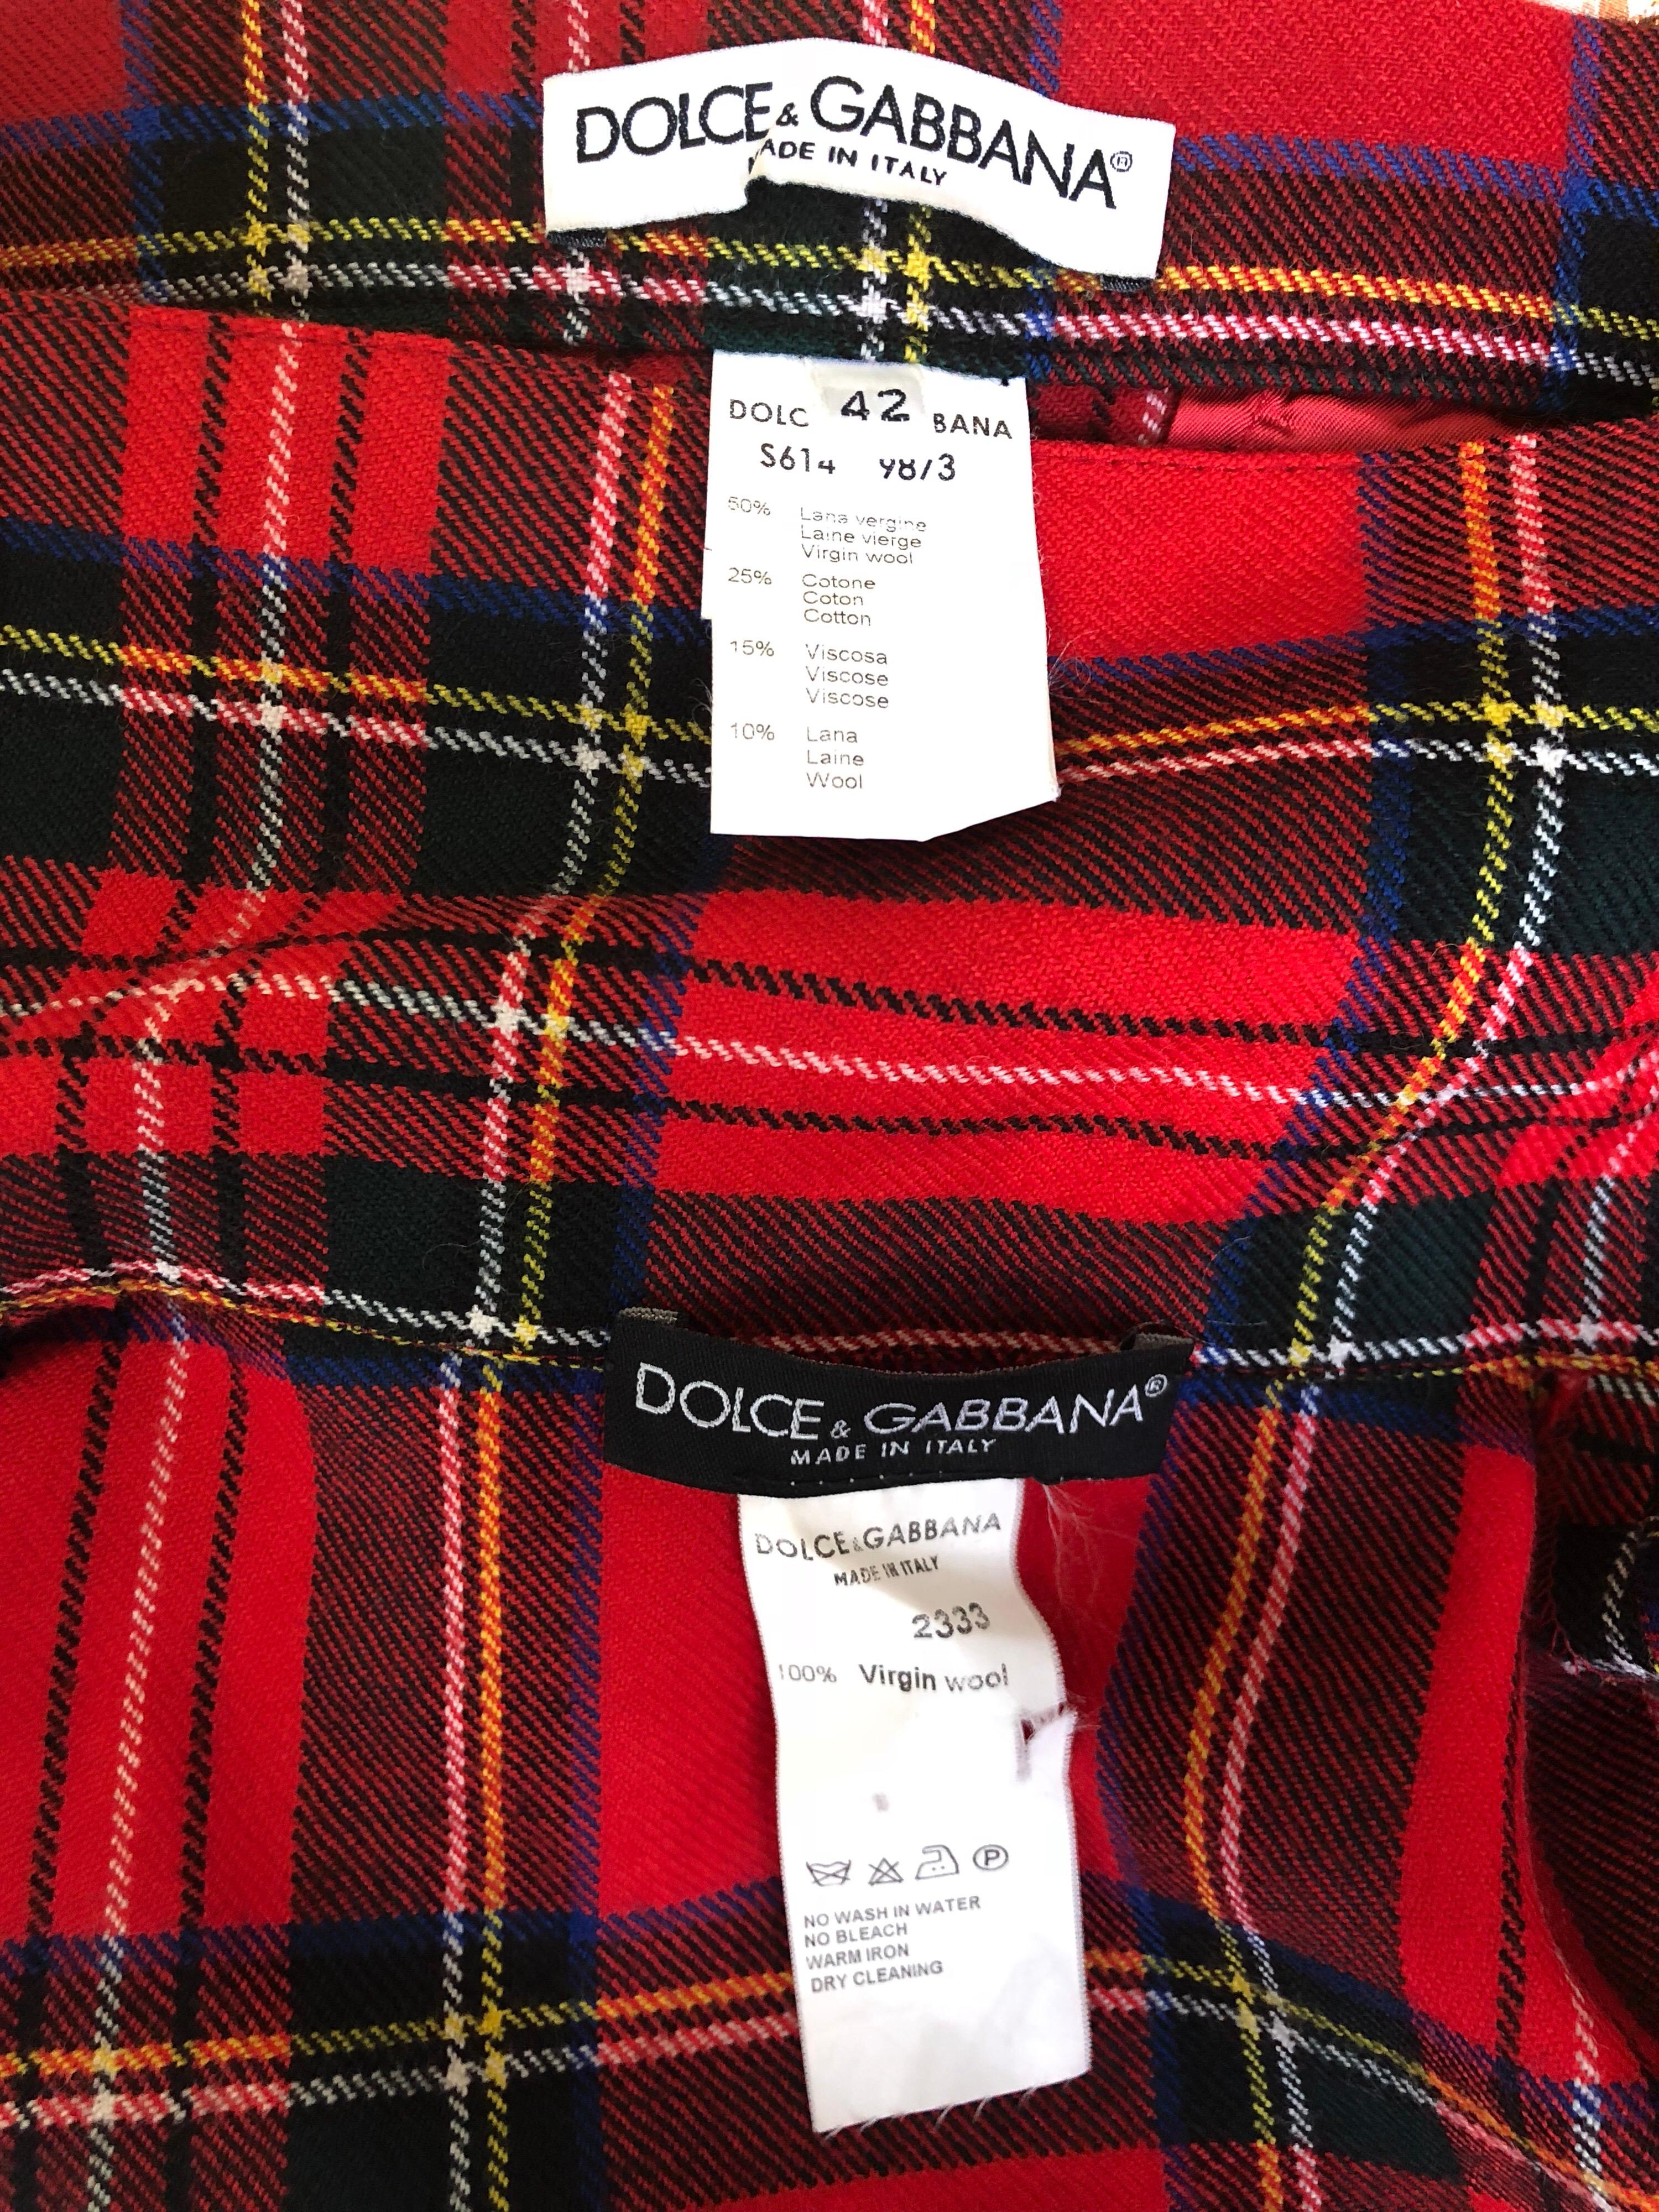 Rare 1990s Dolce & Gabbana Red Tartan Plaid Wool + Denim Flared Jeans and Shirt For Sale 5